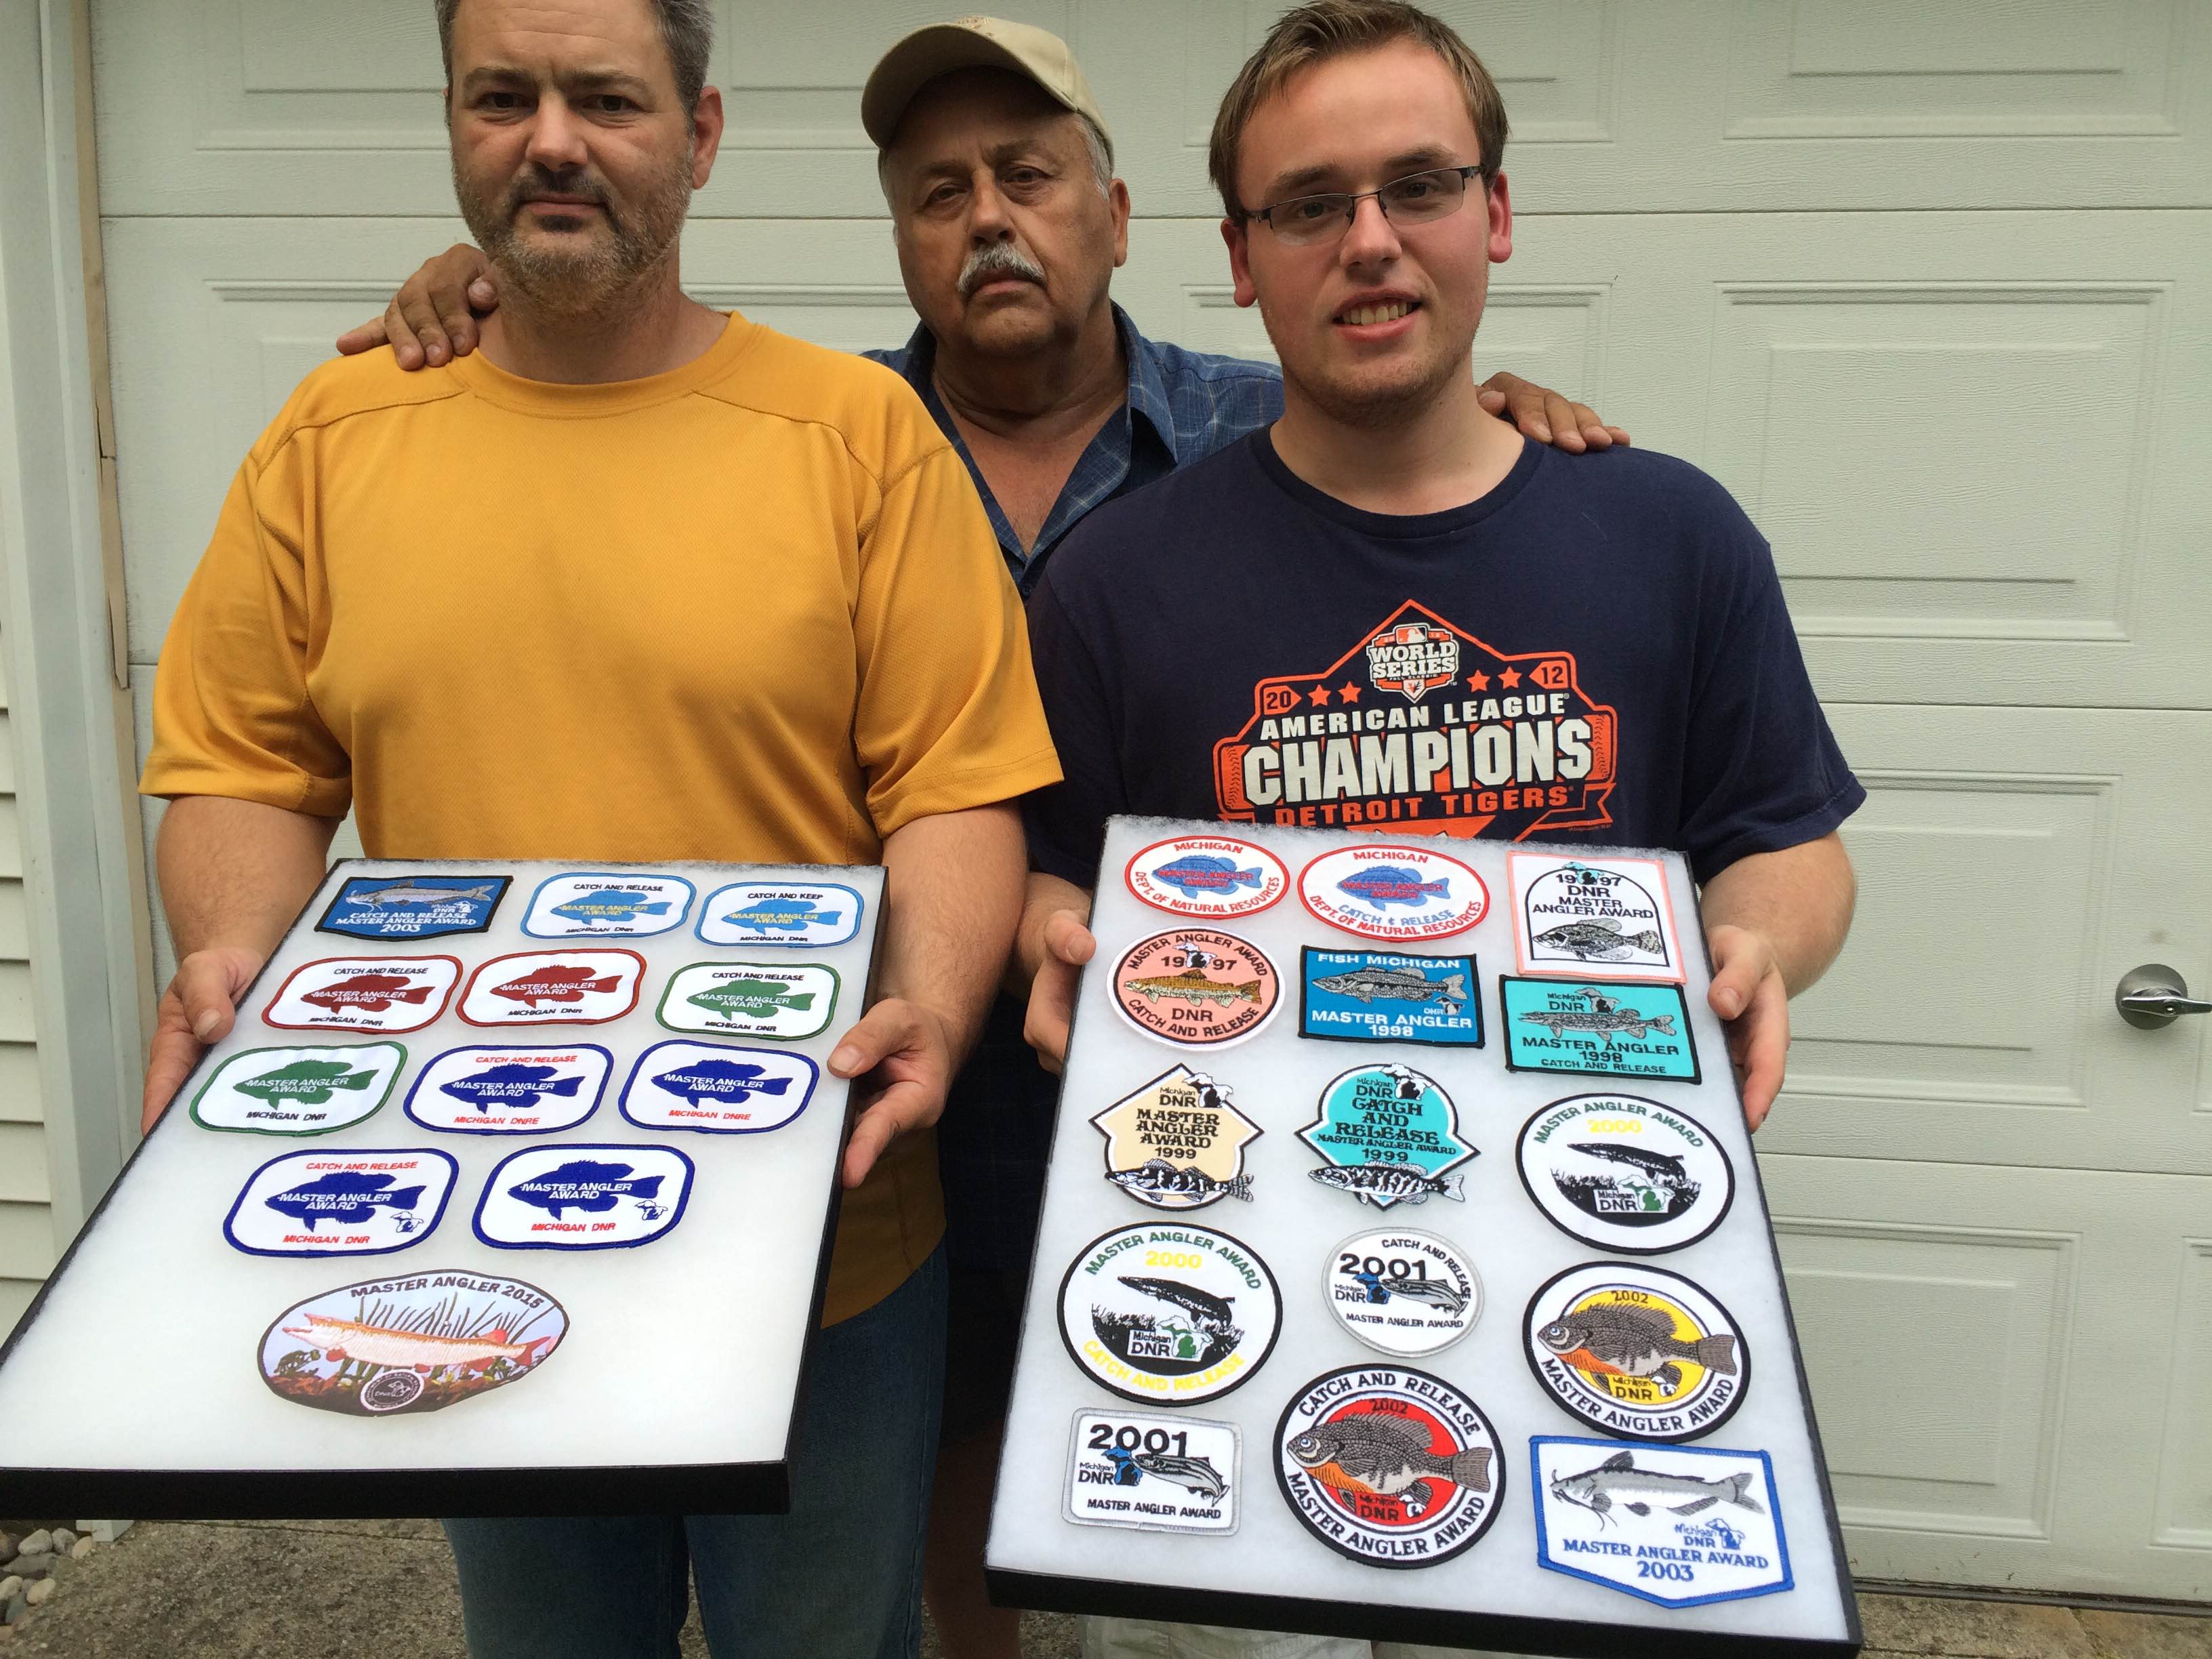 The Witherell family catches big fish and collect the patches given out through the master angler program. (courtesy photo)